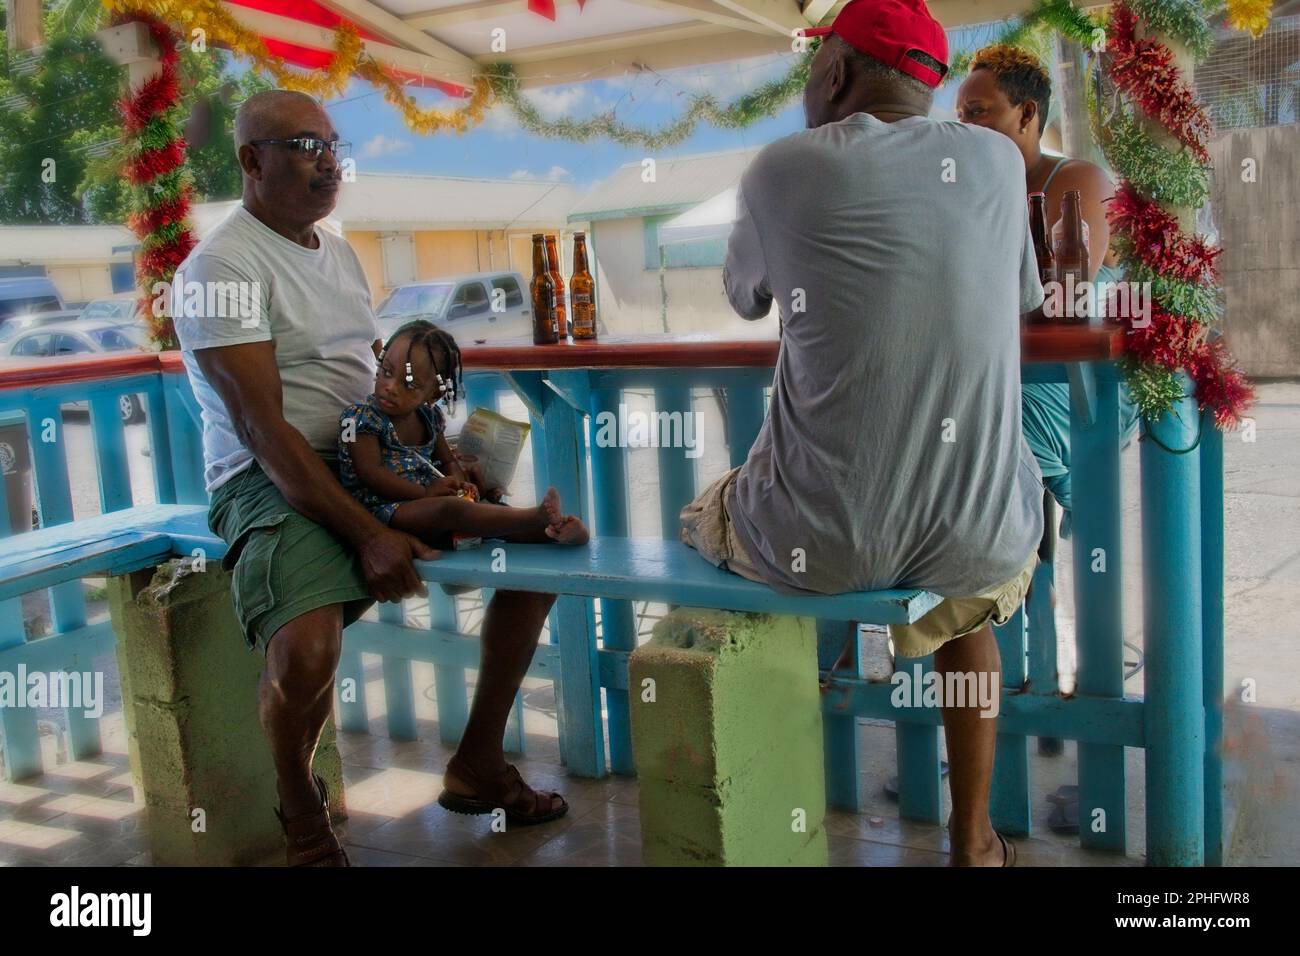 03Feb23 Barbados, Caribbean Three locals and toddler chatting at sunny outside bar Wood seats and colourful decorations Beer bottles on the barrier. Stock Photo